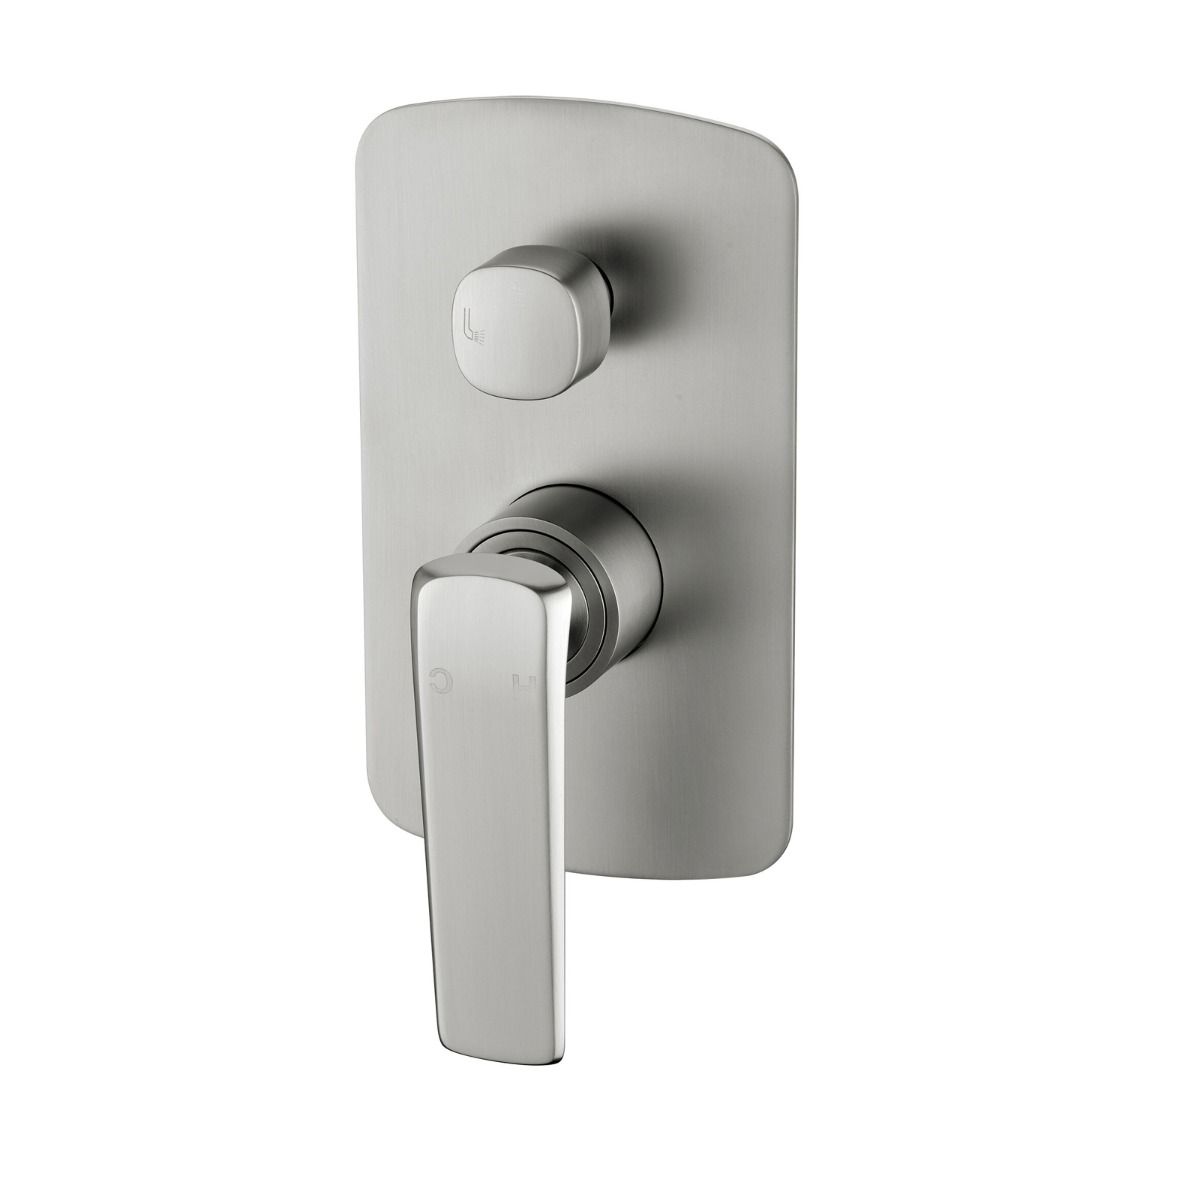 Norico Esperia Brushed Nickel Wall Mixer with Diverter